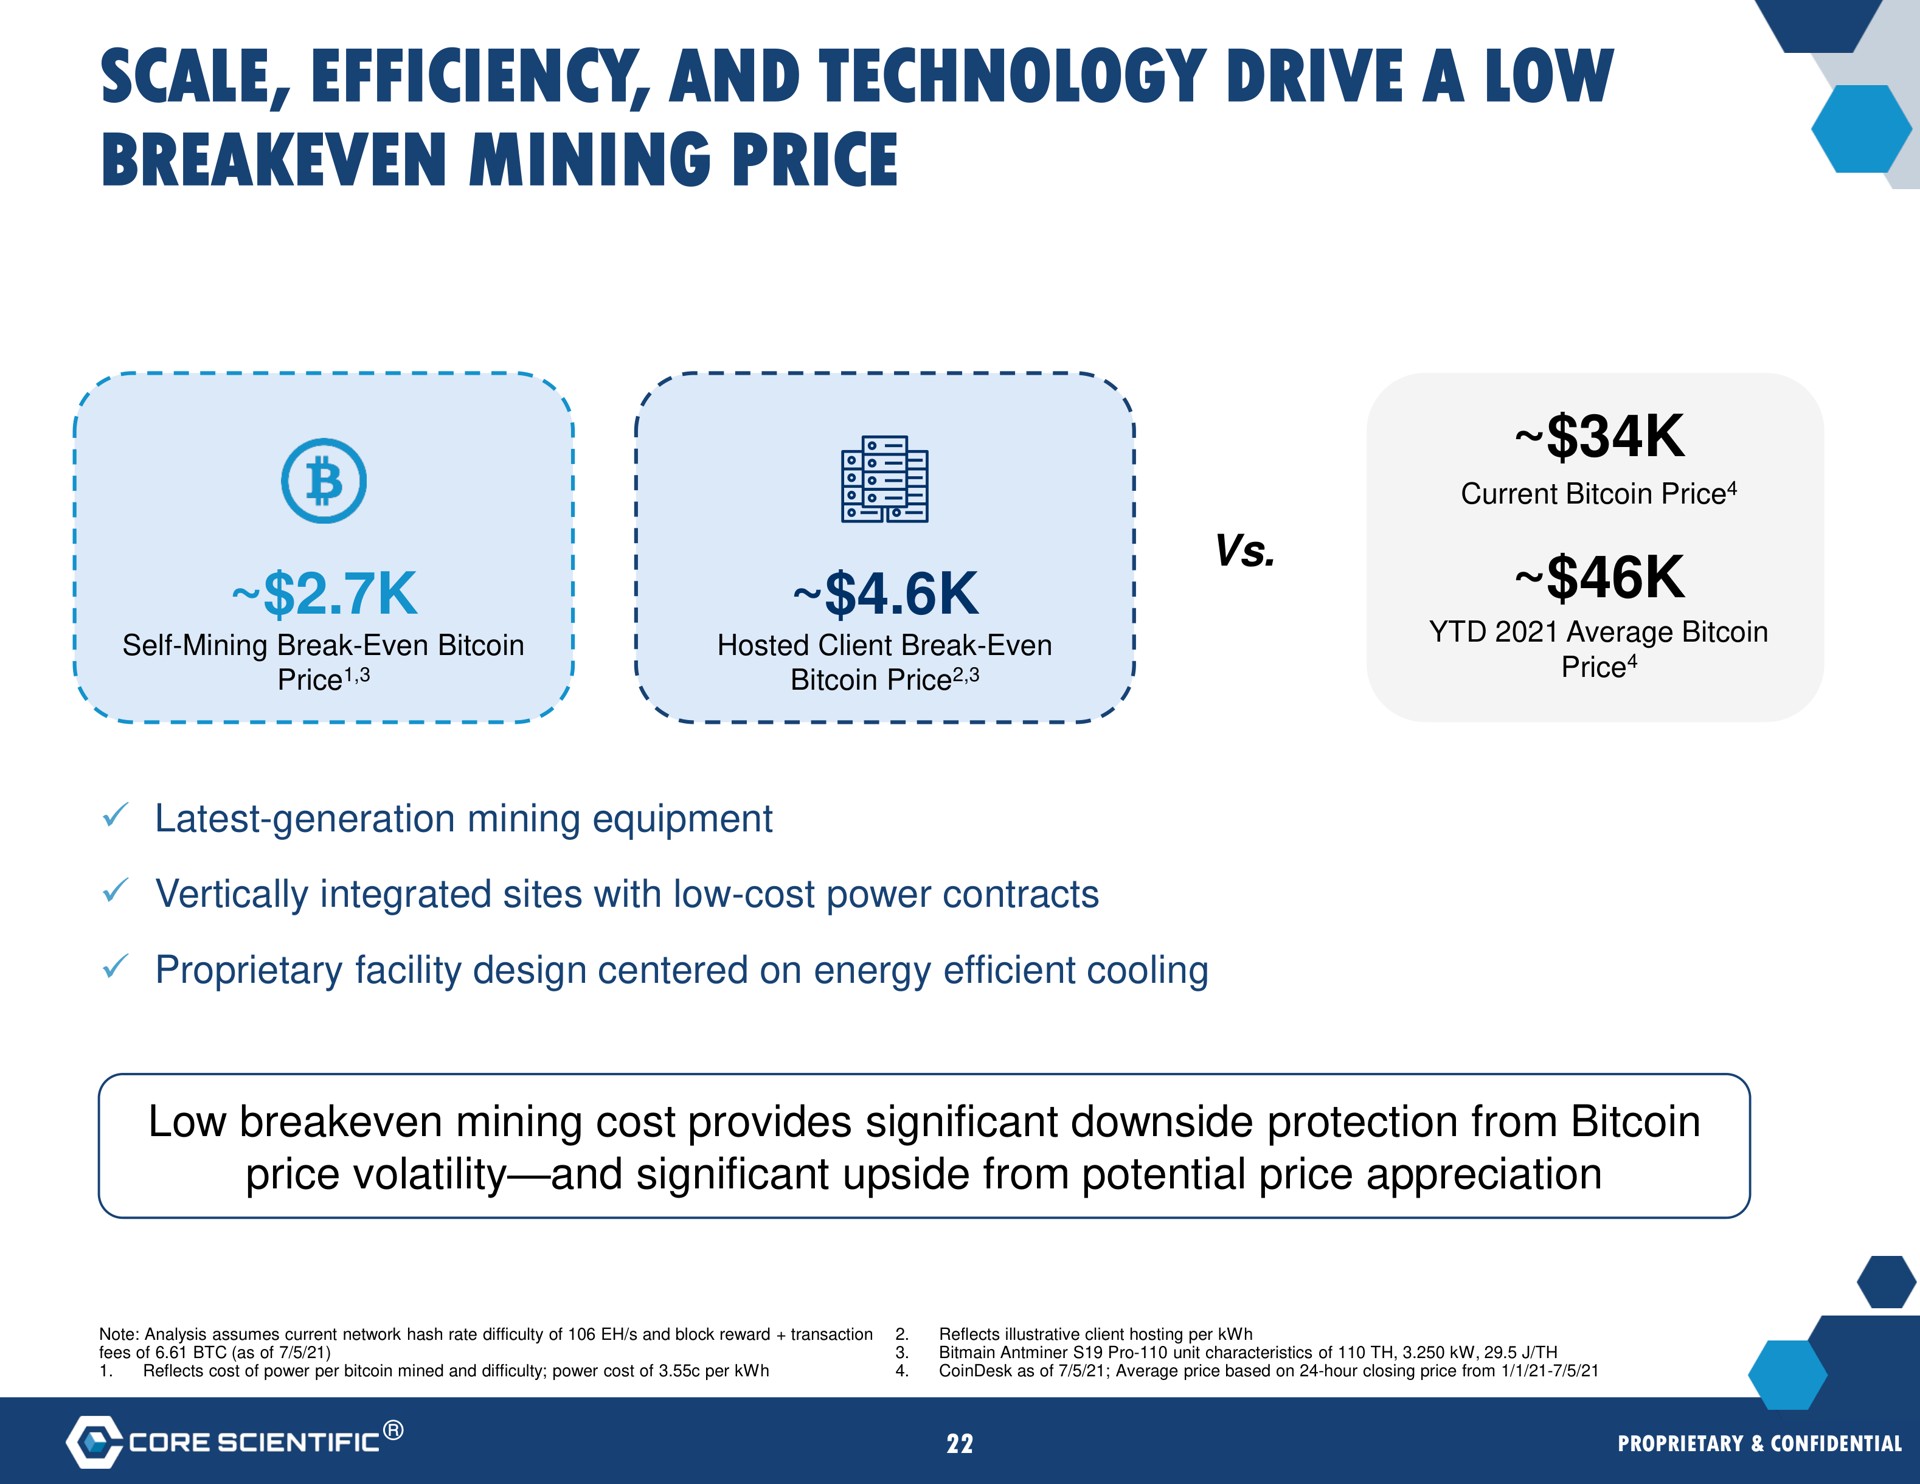 scale efficiency and technology drive a low mining price | Core Scientific